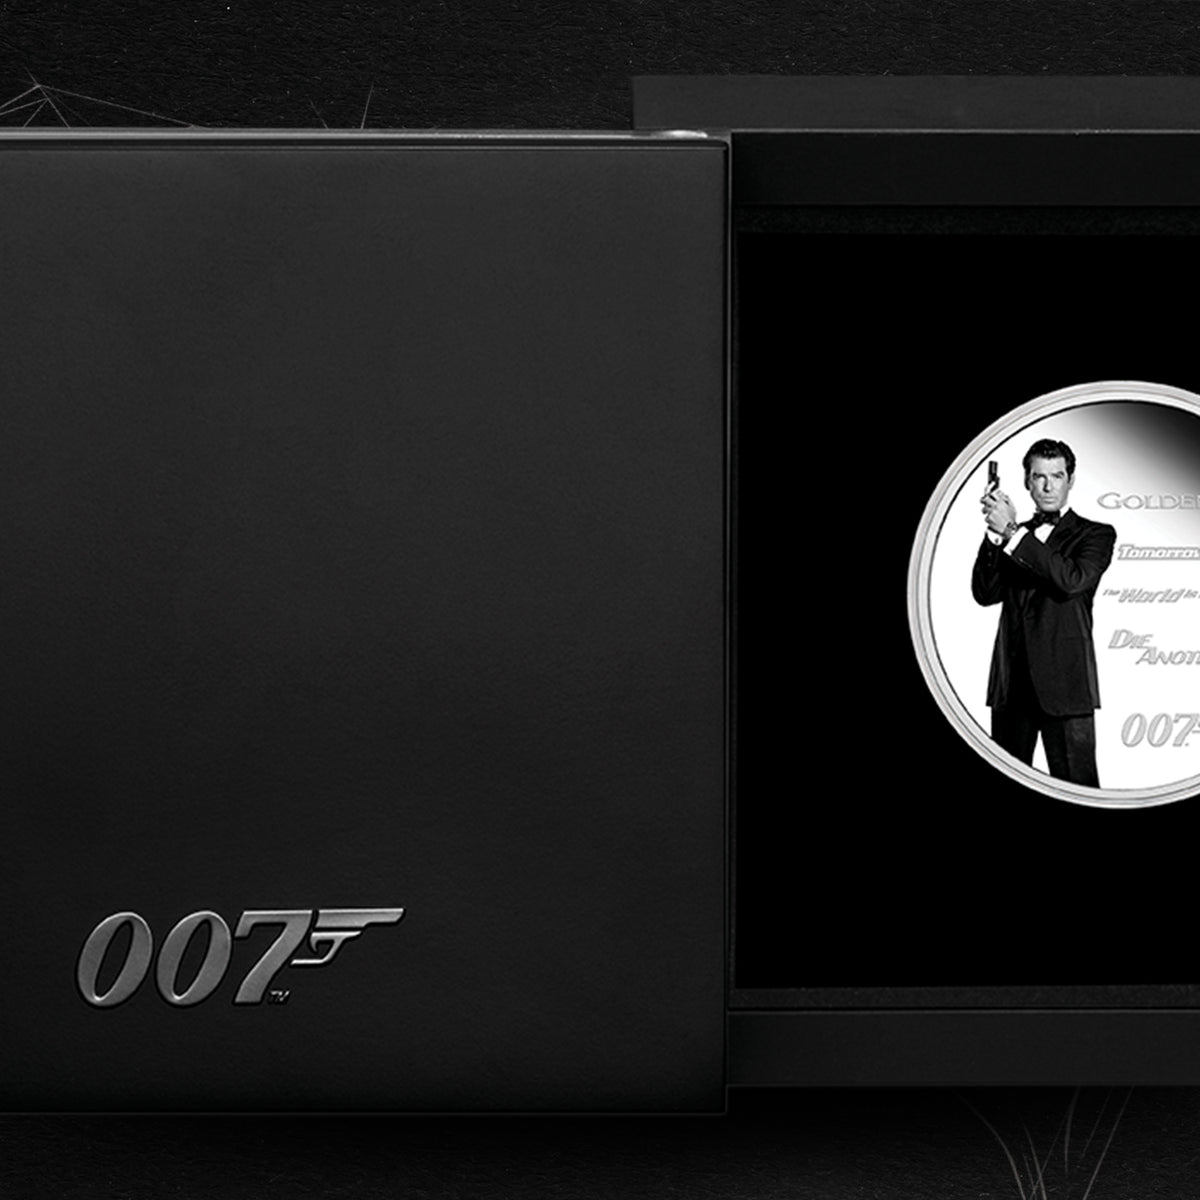 James Bond Pierce Brosnan 1oz Silver Proof Coin - Numbered Edition - By The Perth Mint